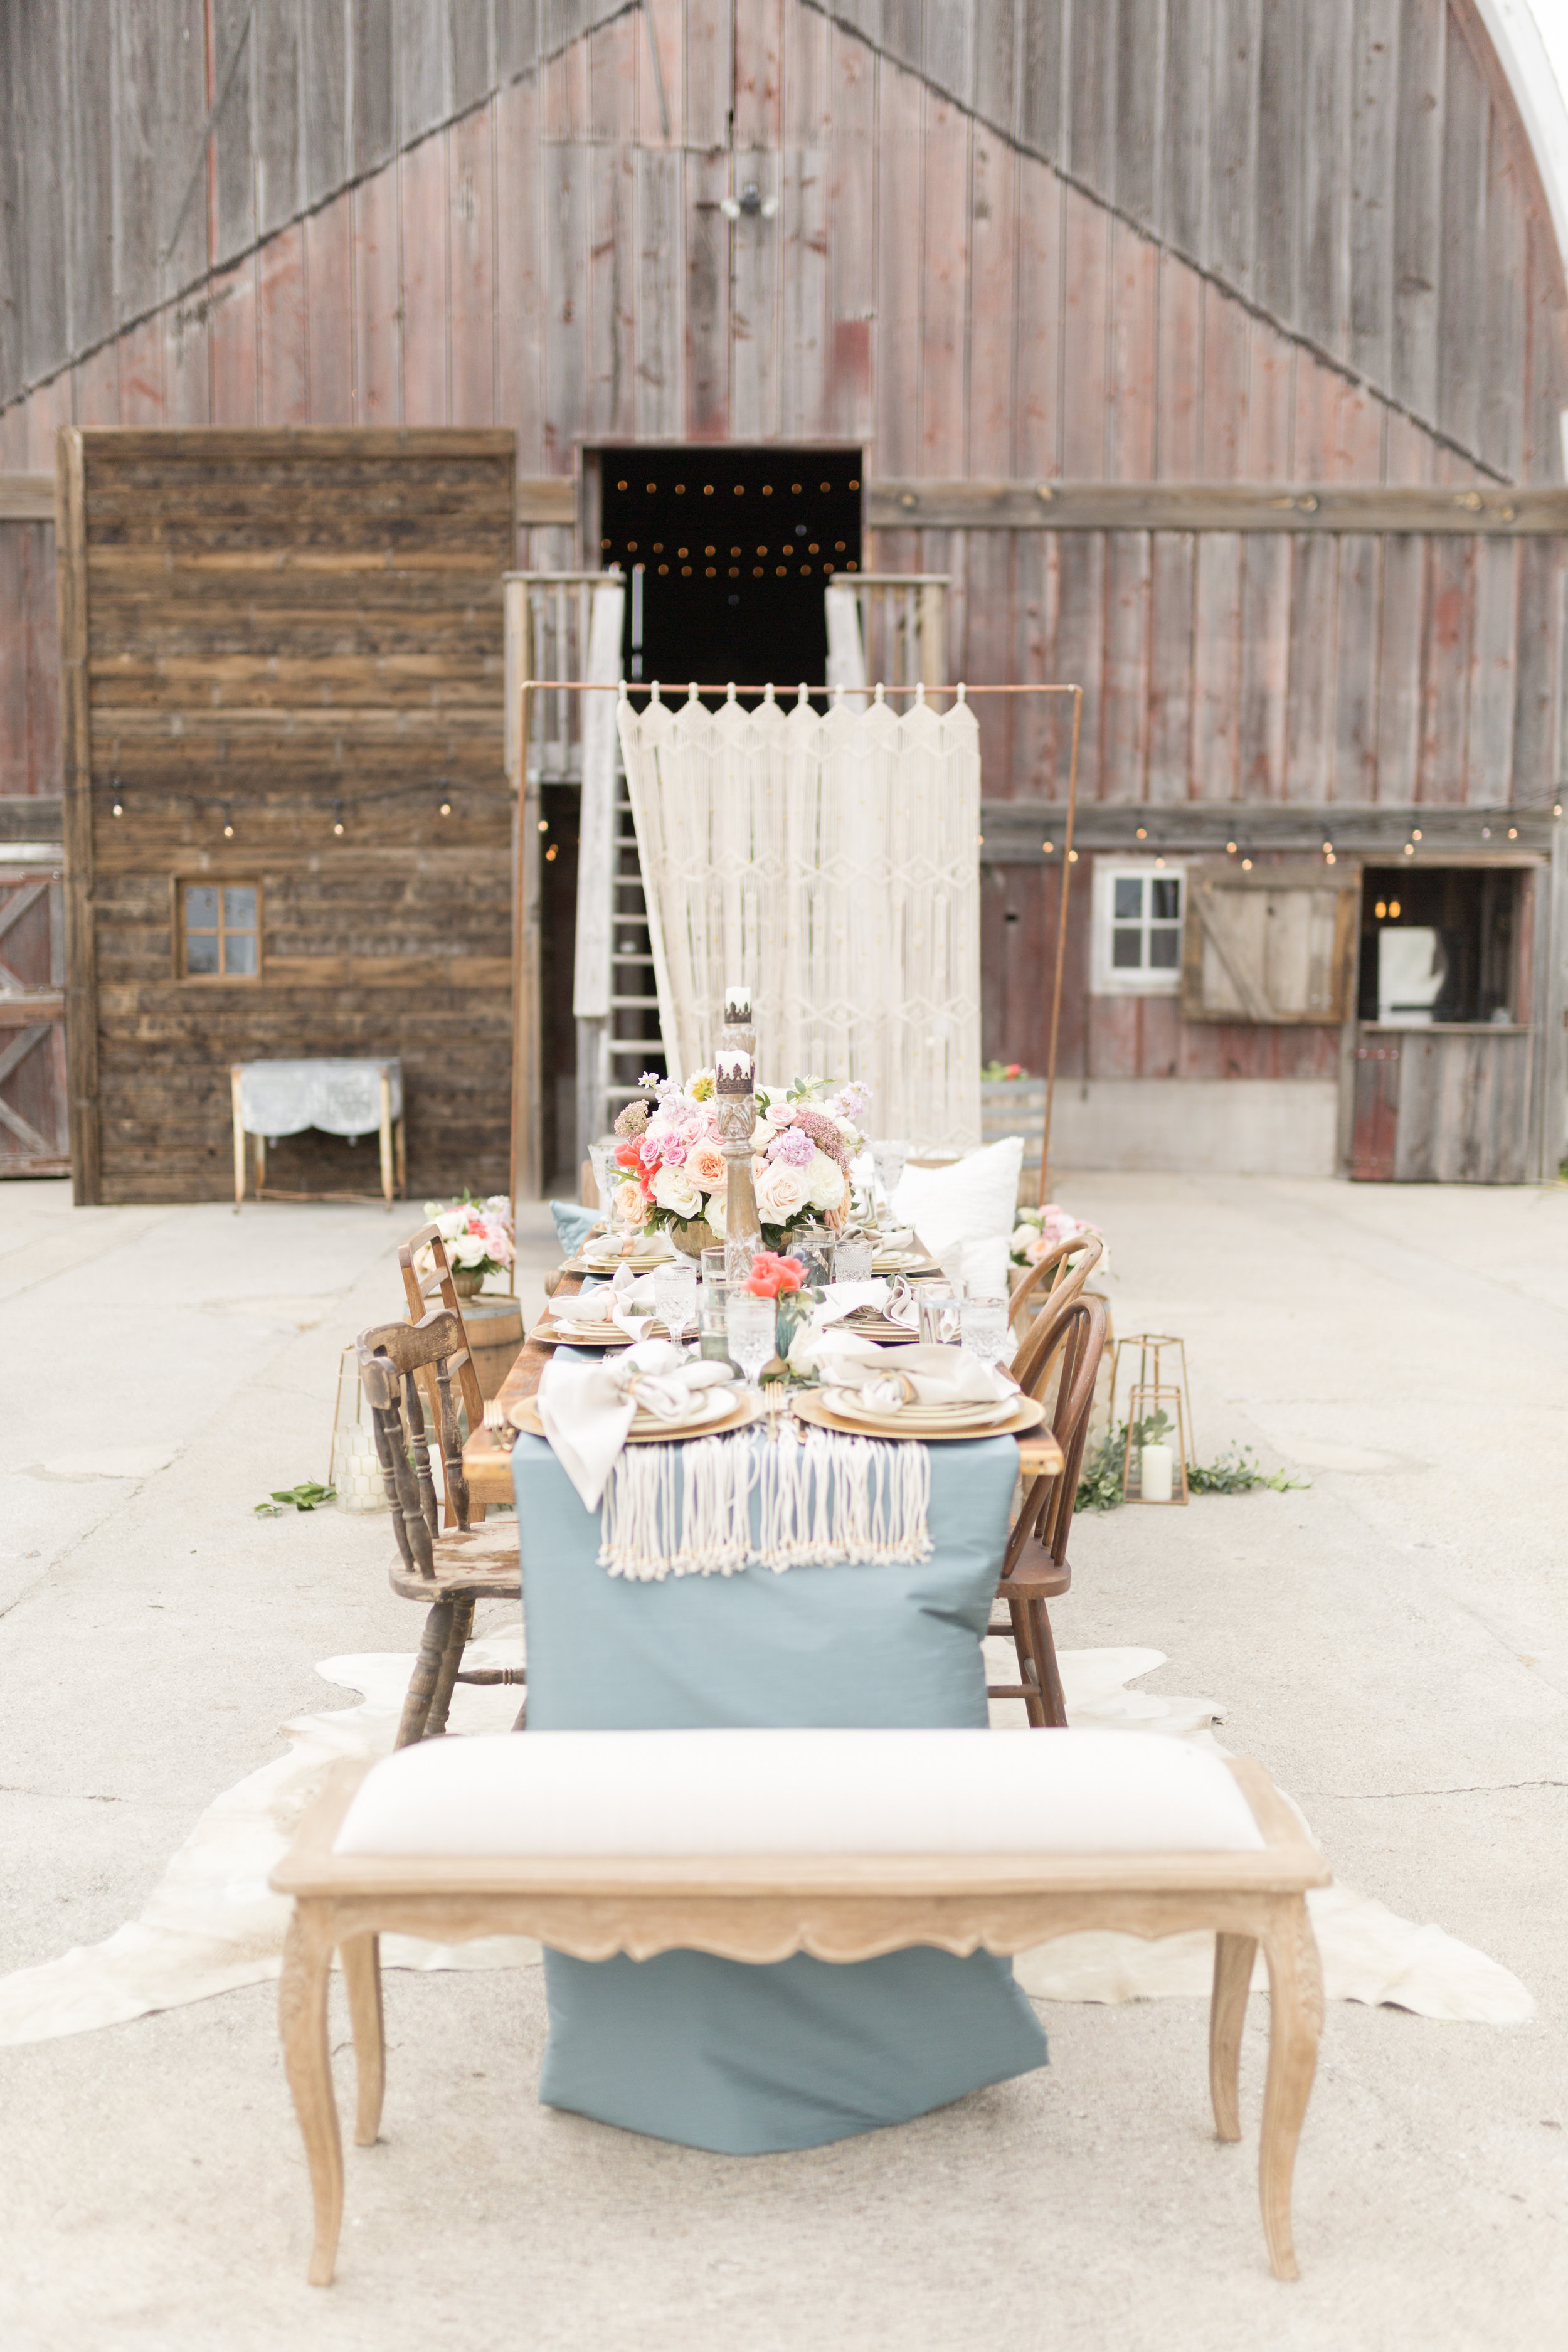 Summer rustic elegant Chicago wedding styled shoot captured by Sarah DeMaranville Photography. See more summer wedding ideas at CHItheeWED.com!